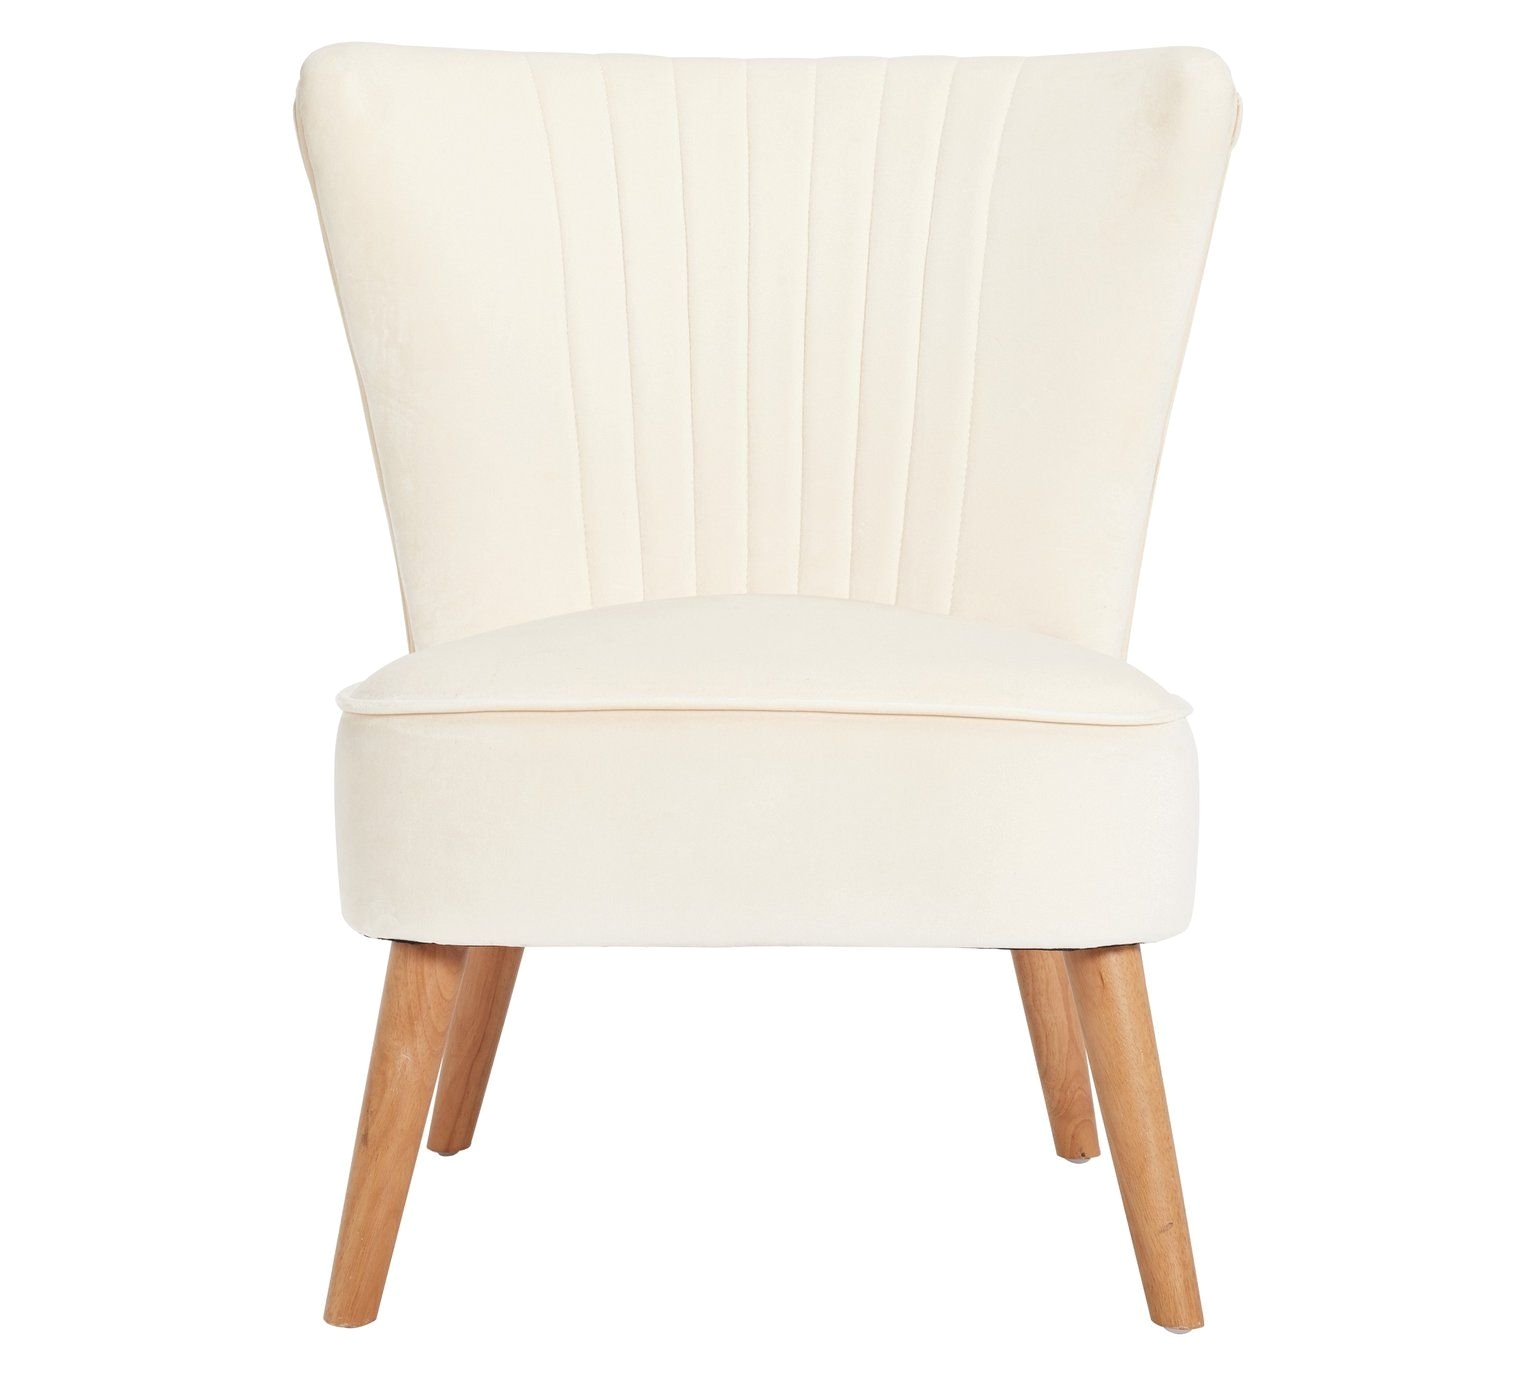 Pink Fluffy Chair Argos Buy Collection Alana Fabric Shell Back Chair Mink at Argos Co Uk